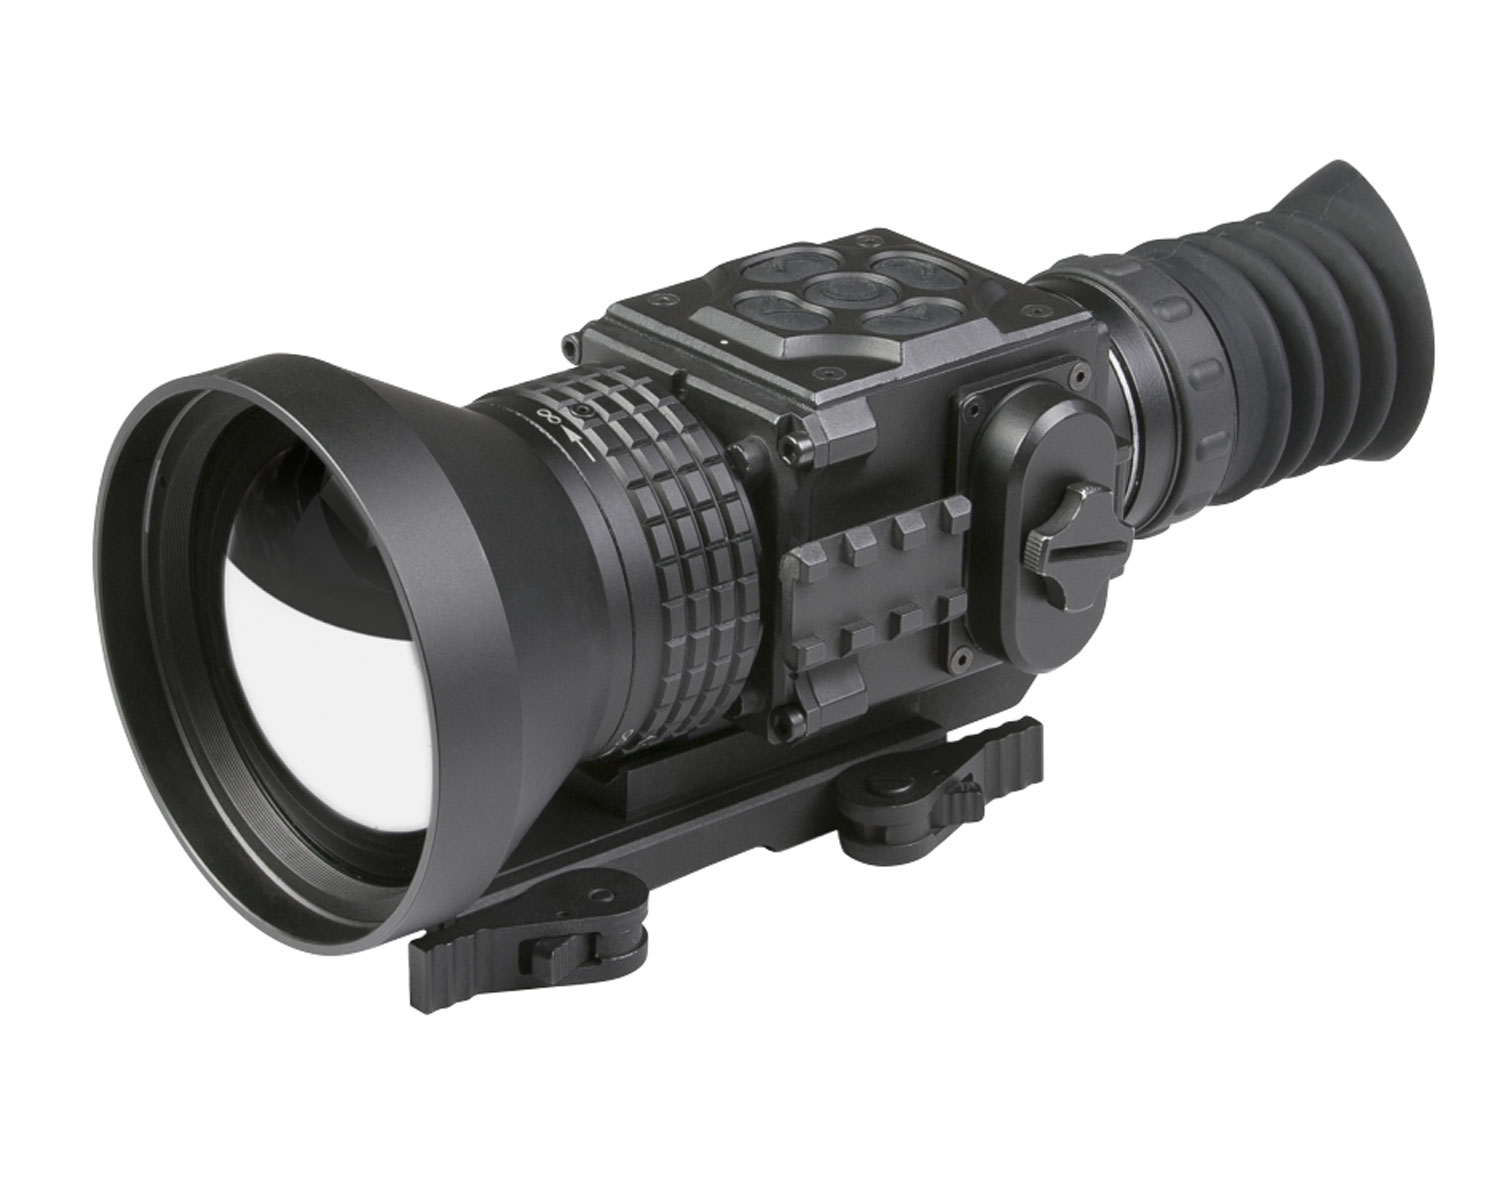 AGM Global Vision 3083455008SE71 Secutor TS75-384 Thermal Rifle Scope Black Matte 3.6x75mm Multi Reticle Digital 1x/2x/4x/PIP Zoom 384x288, 50Hz Resolution Features Rangefinder